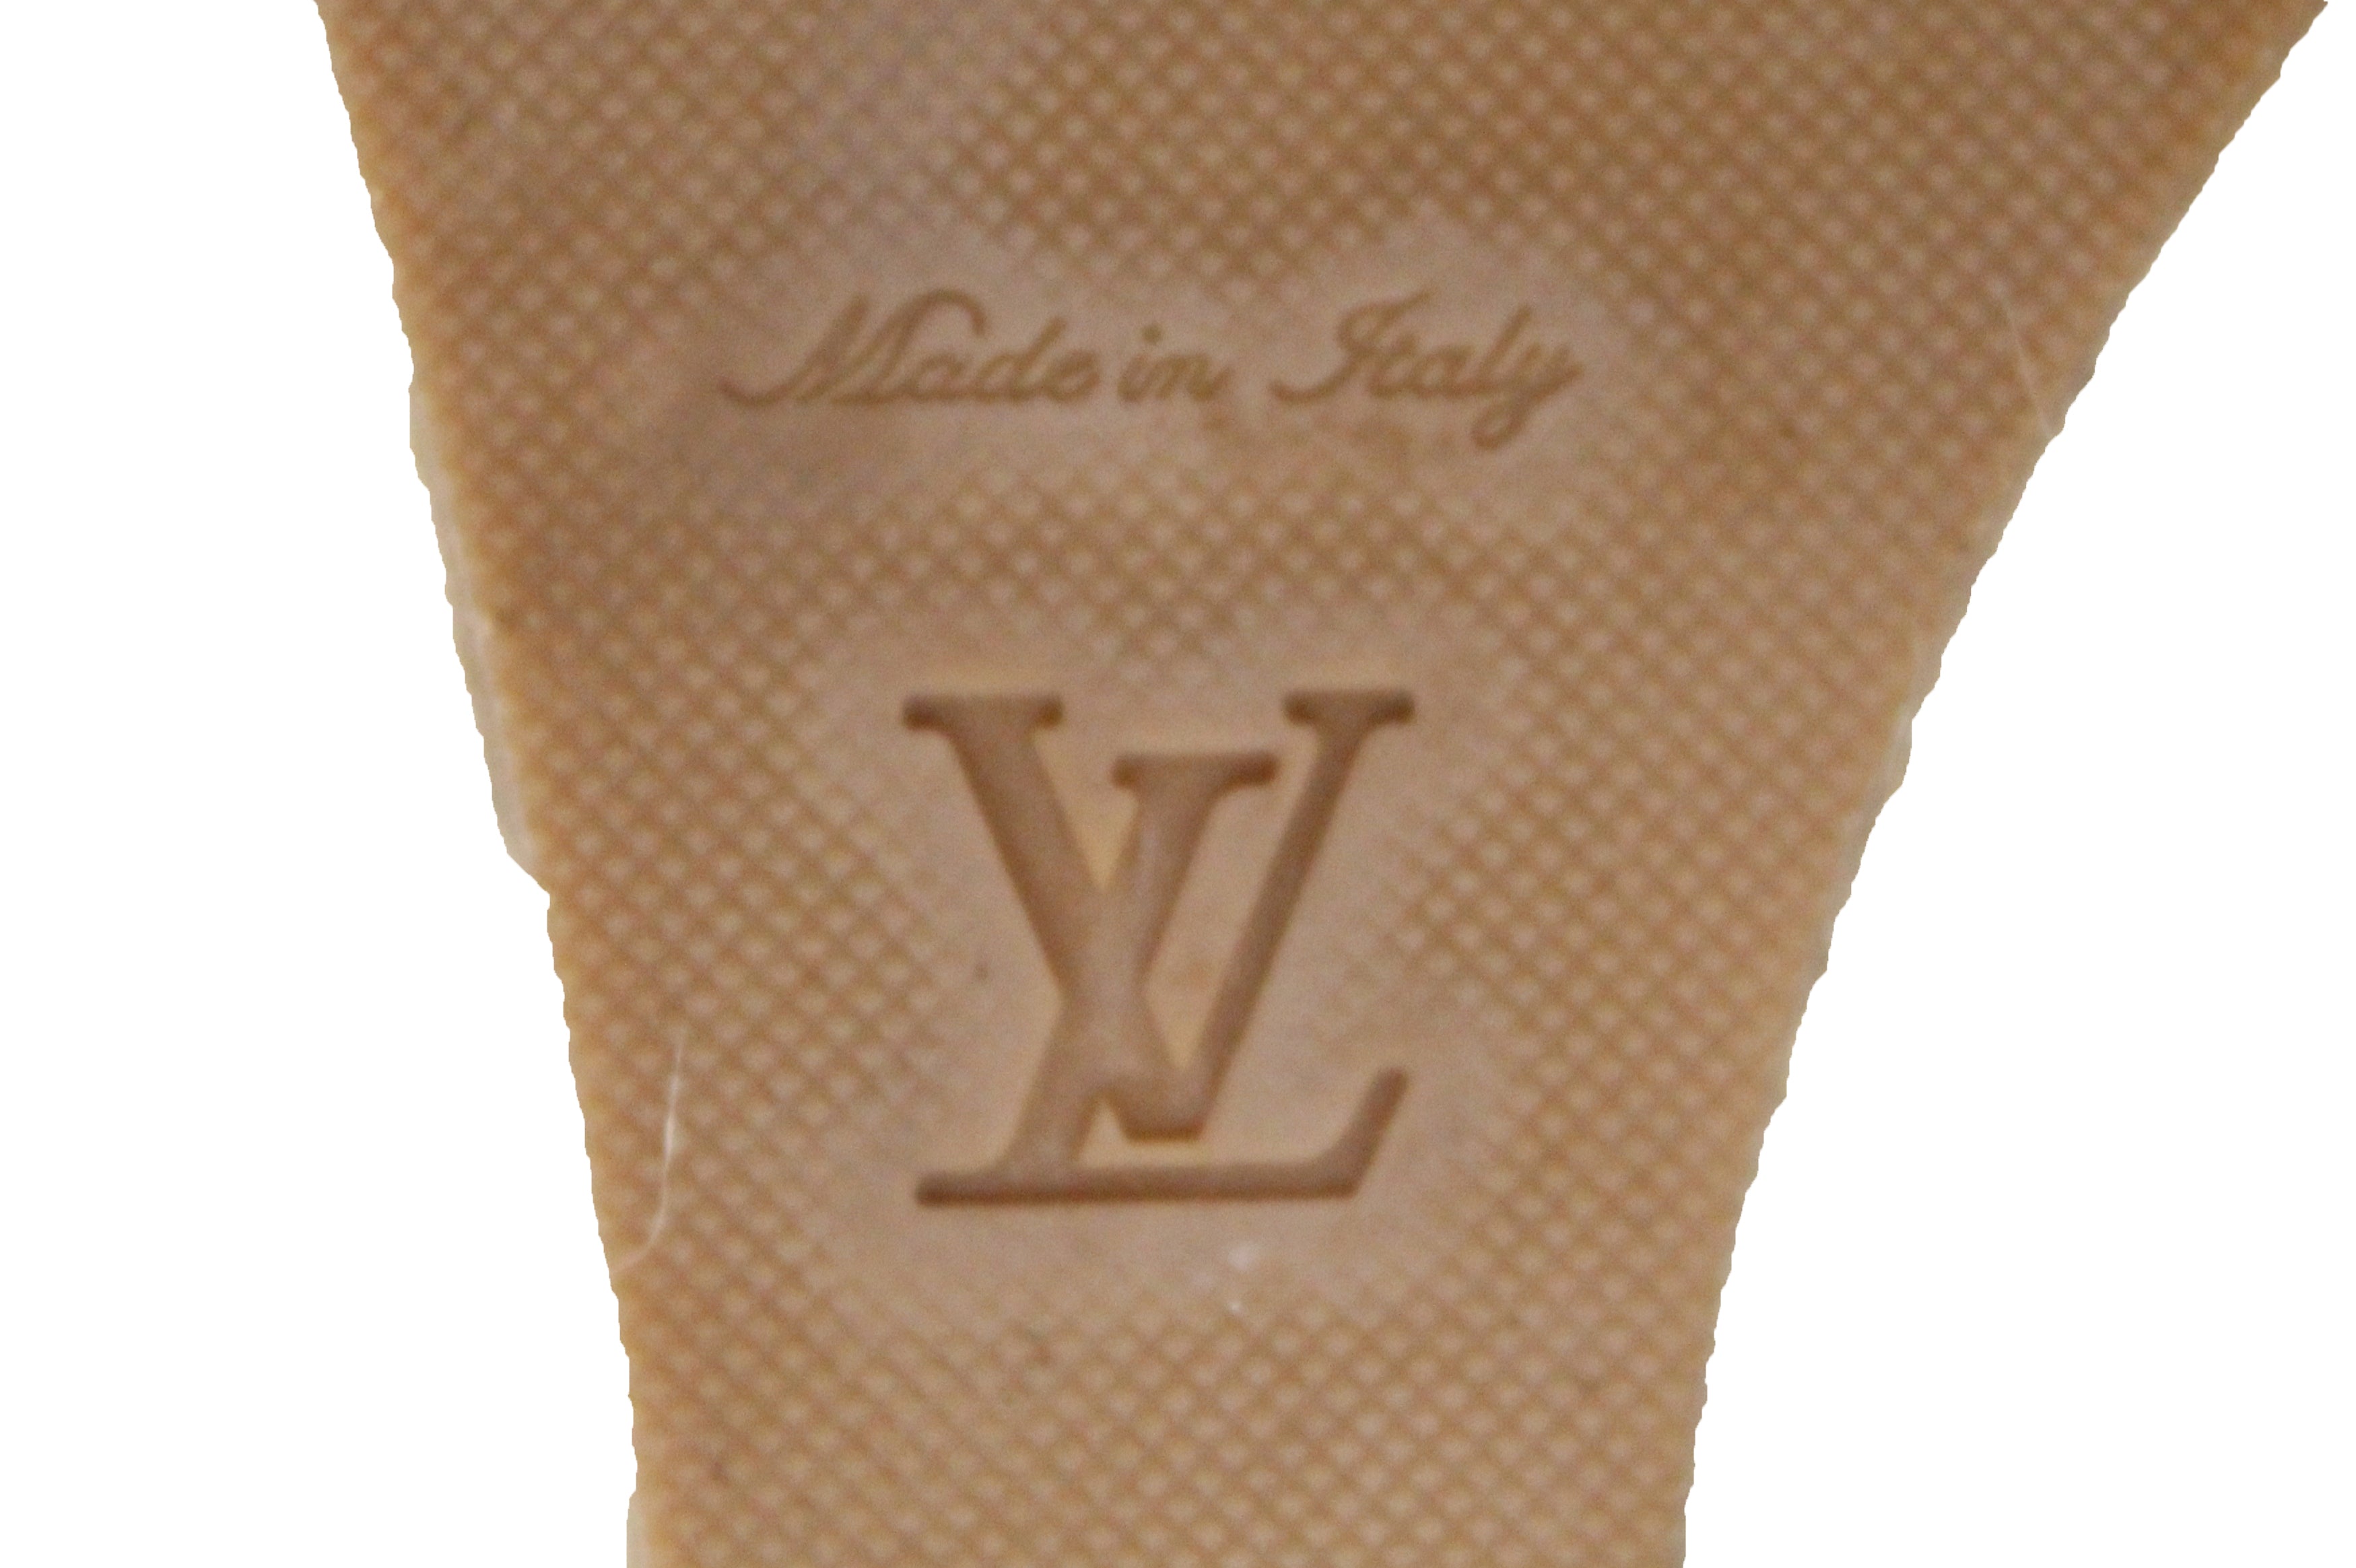 Louis Vuitton 1ABPGH by The Pool Starboard Wedge Sandal , White, 38